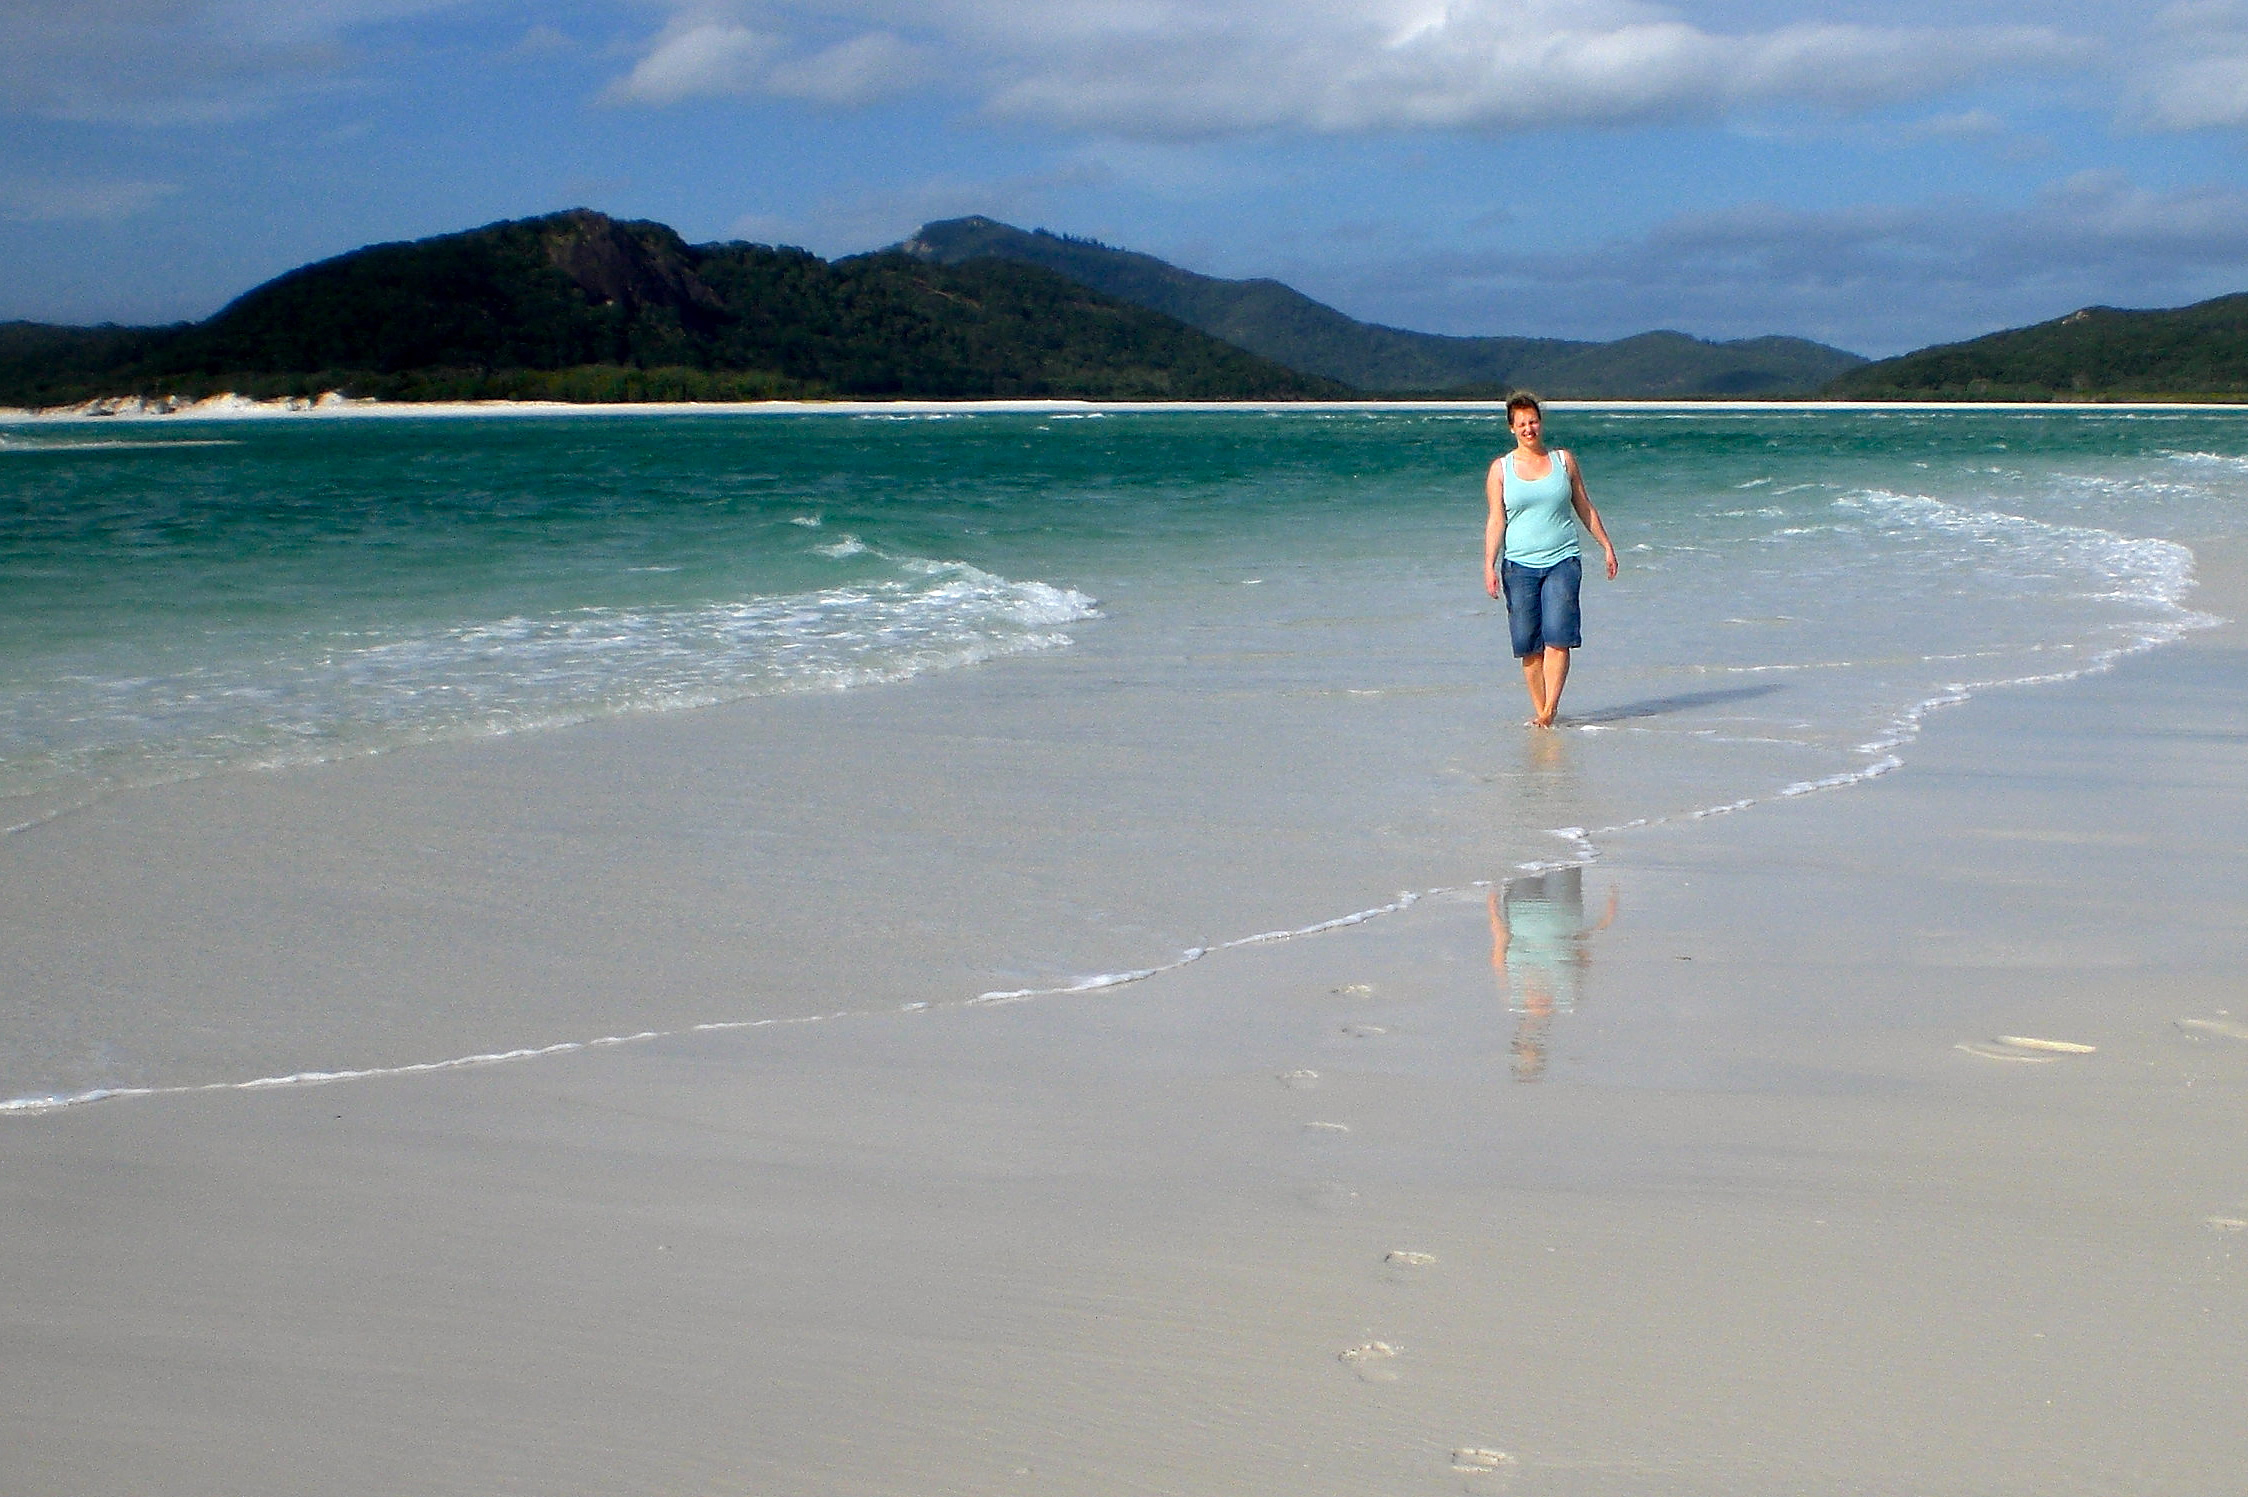 Taking a stroll along the white sands of the Whitsunday Islands in Australia